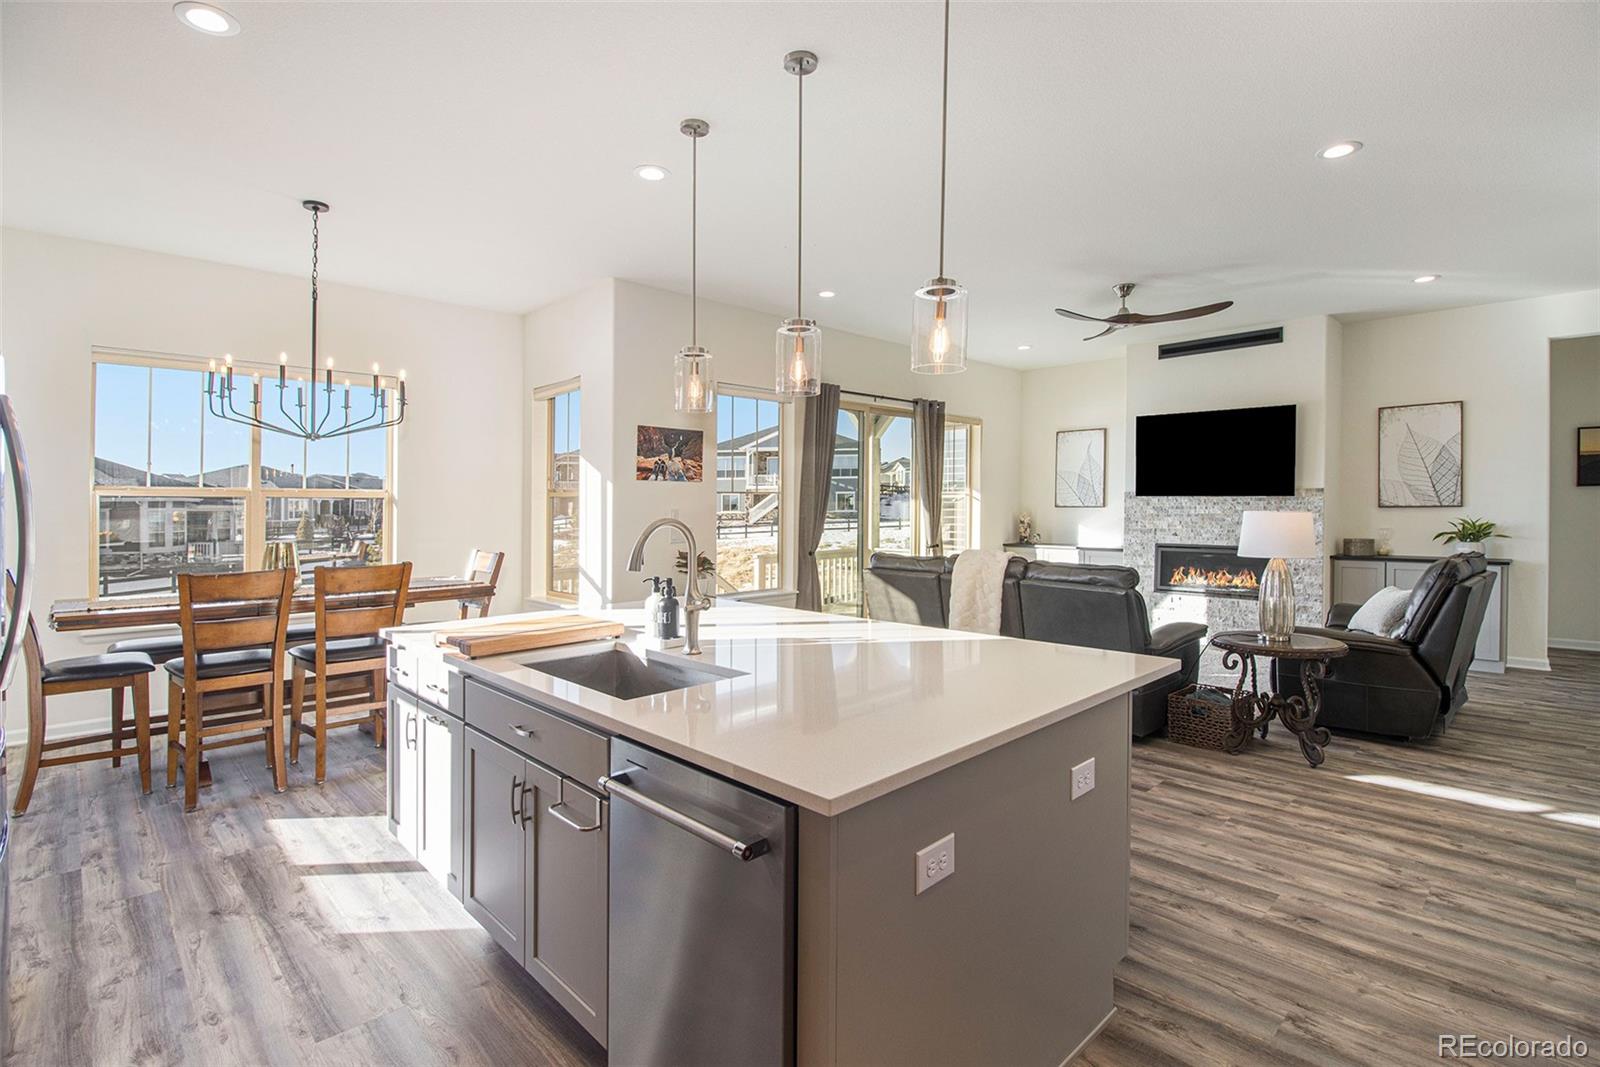 a open kitchen with stainless steel appliances kitchen island a large island in the center